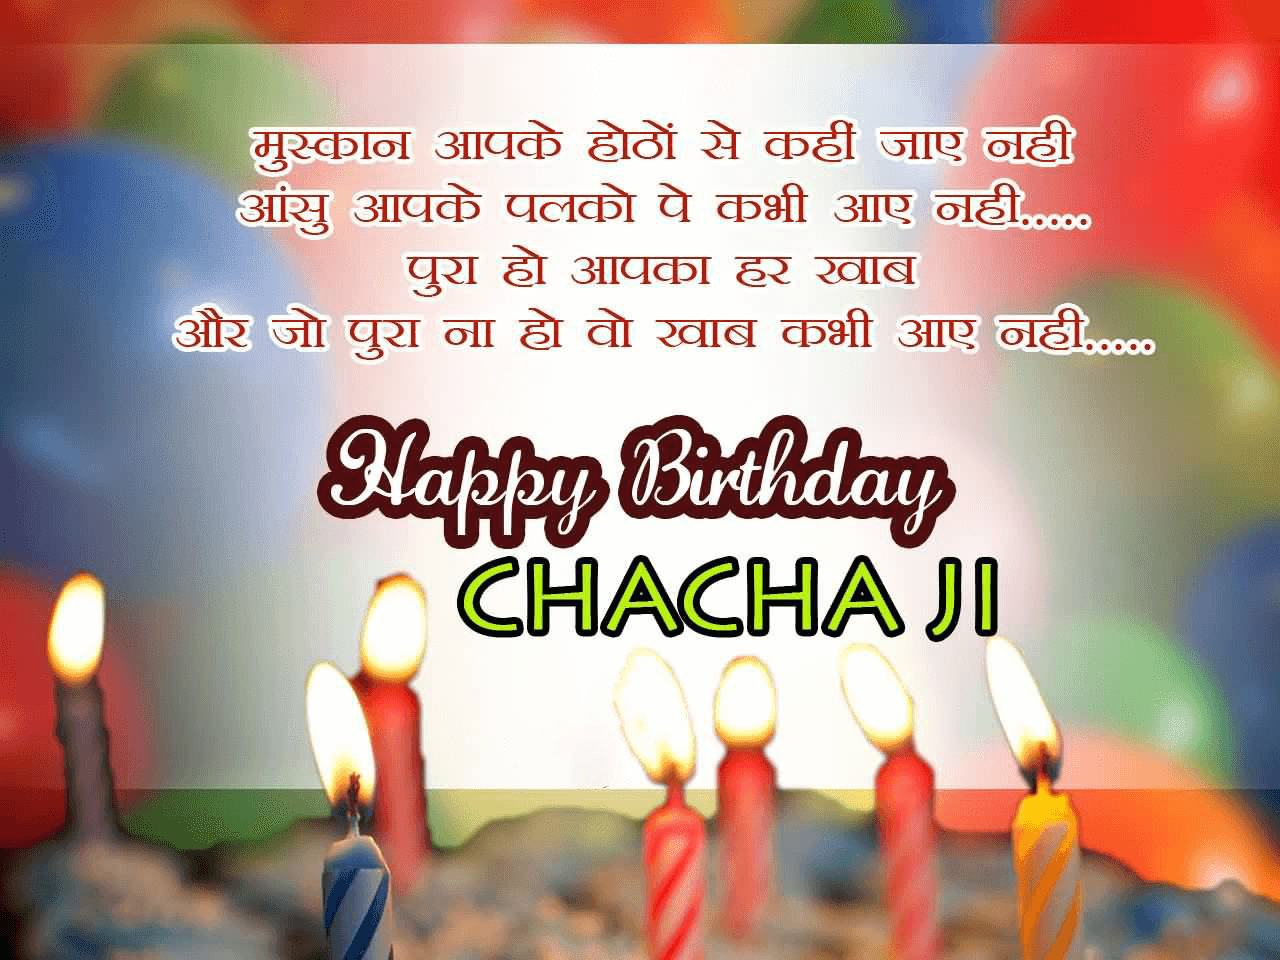 81+ Happy Birthday Wishes for Chachu – Messages, Images, Wishes, & Quotes